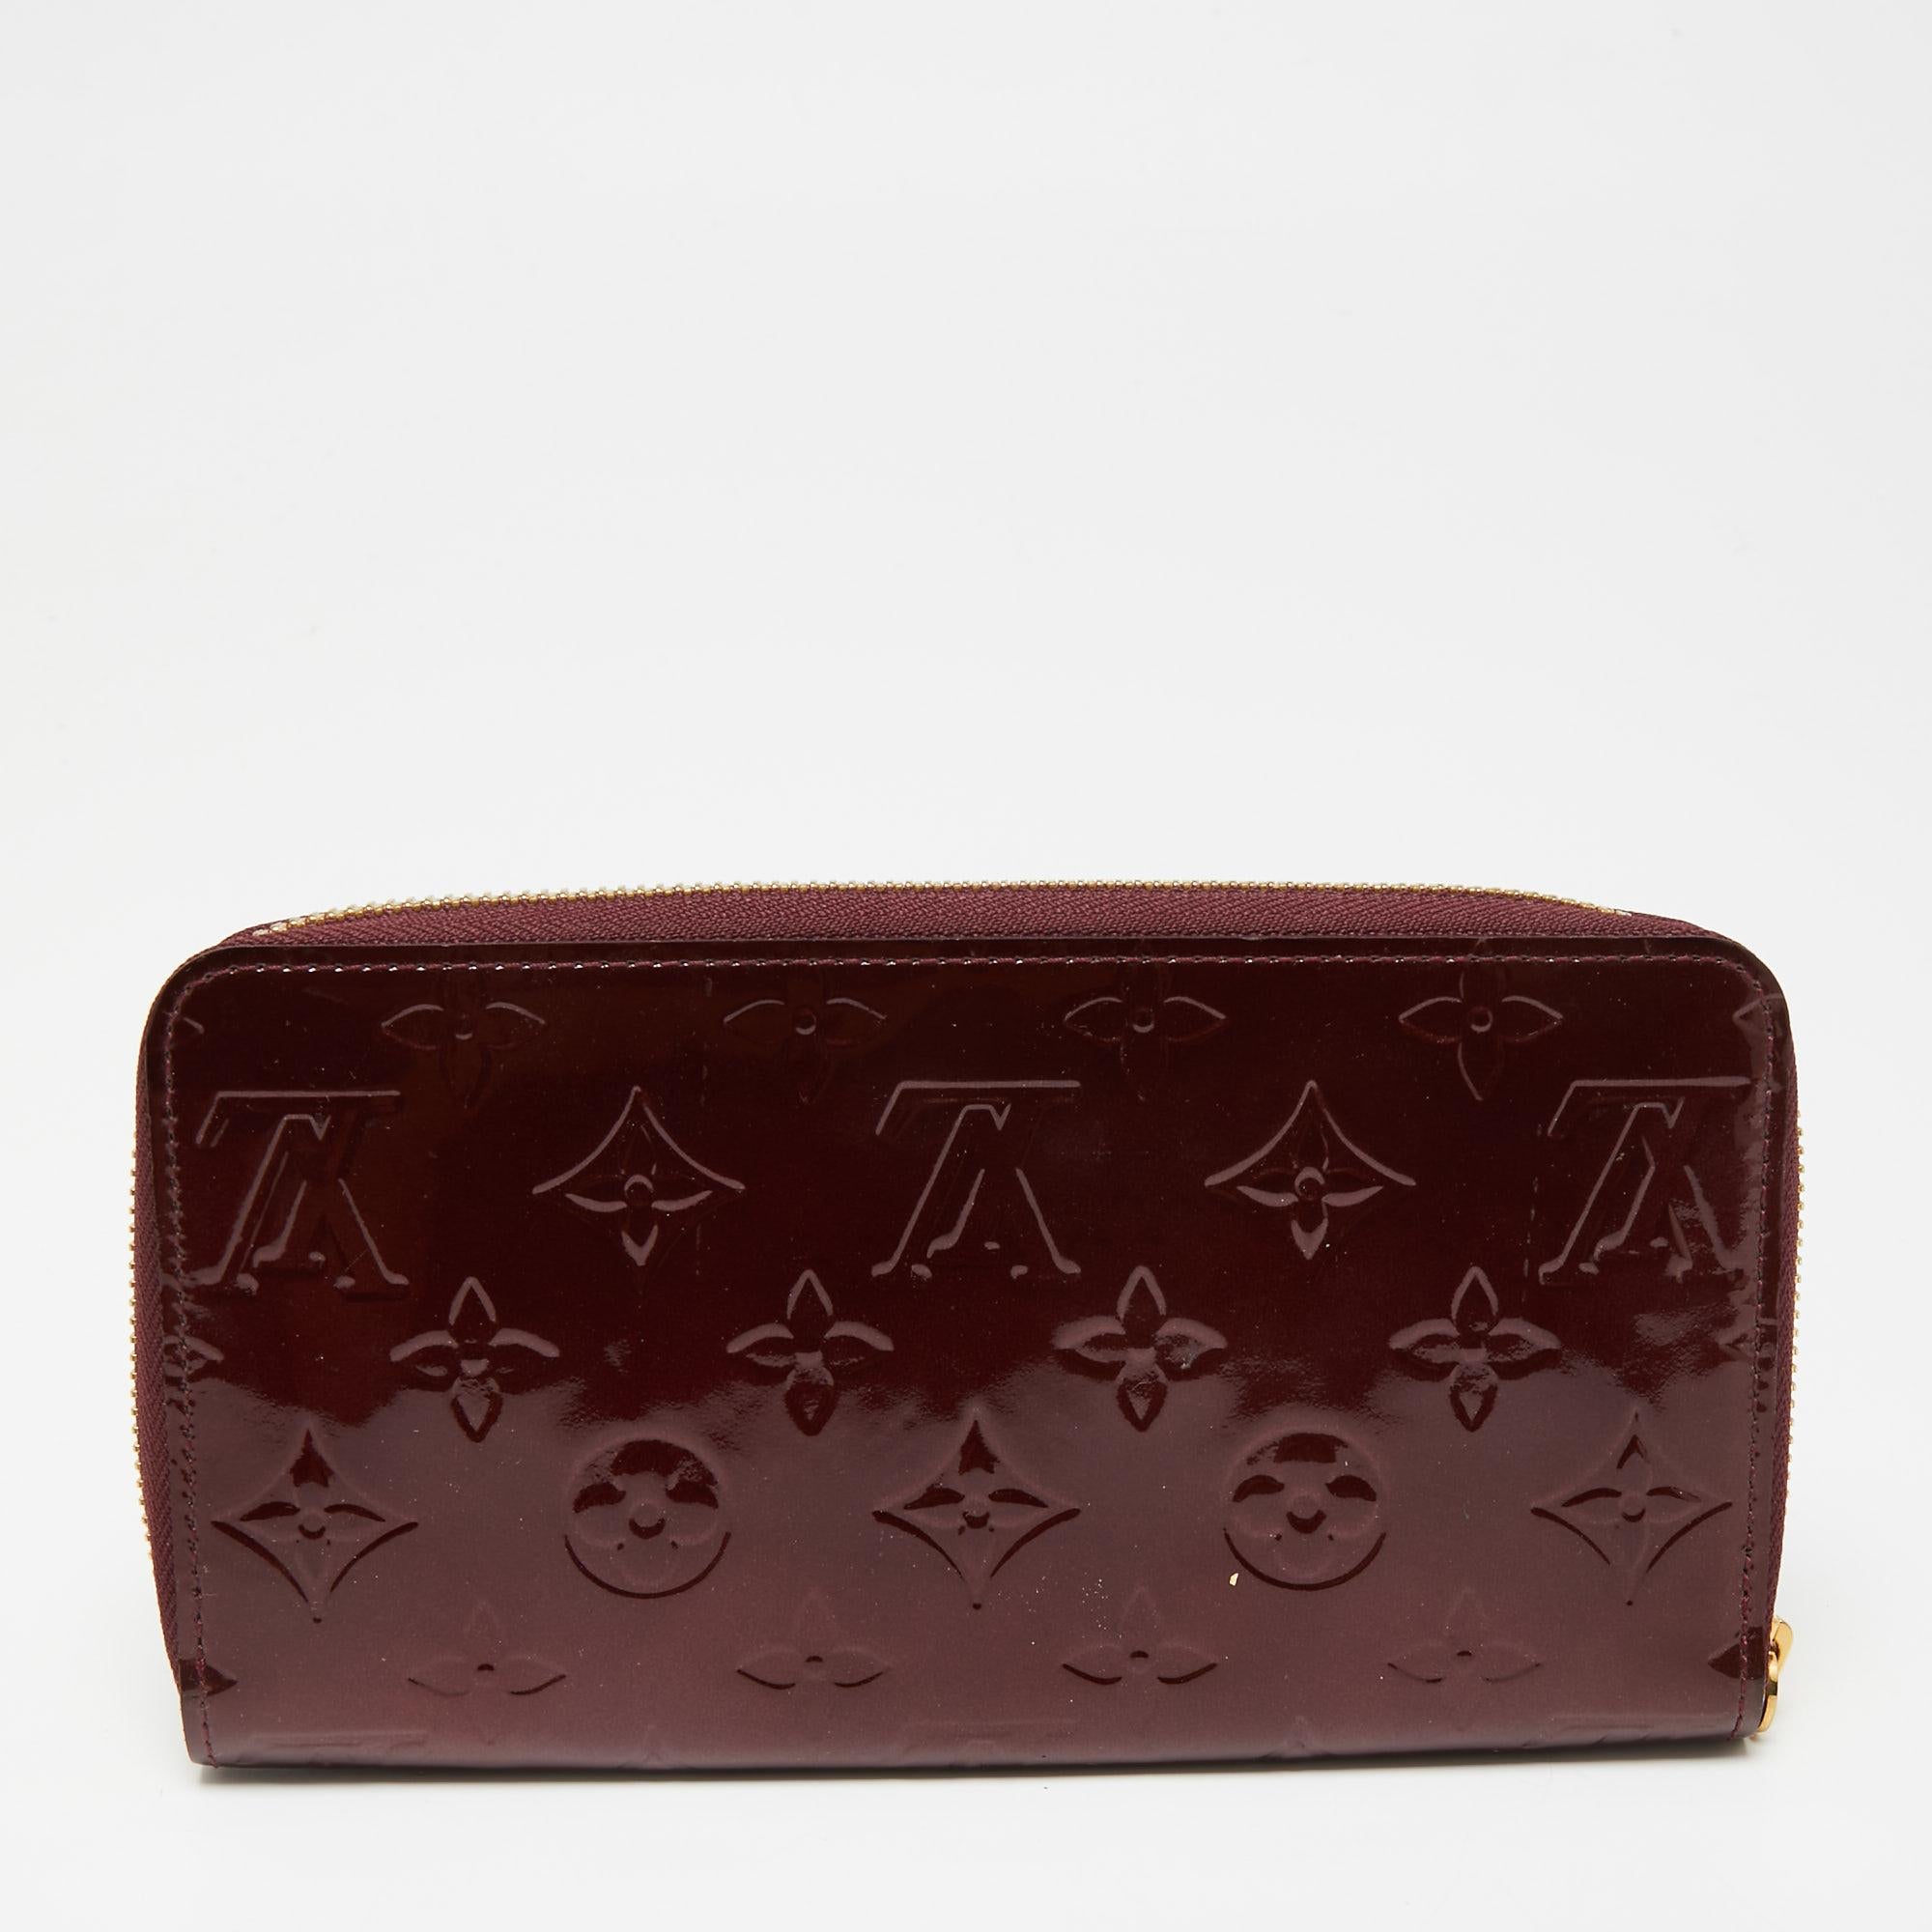 This Louis Vuitton Zippy wallet is conveniently designed for everyday use. Crafted from the signature monogram Vernis patent leather, it is paired with a zip-around closure and gold-tone hardware. The compartmentalized interior of the wallet will